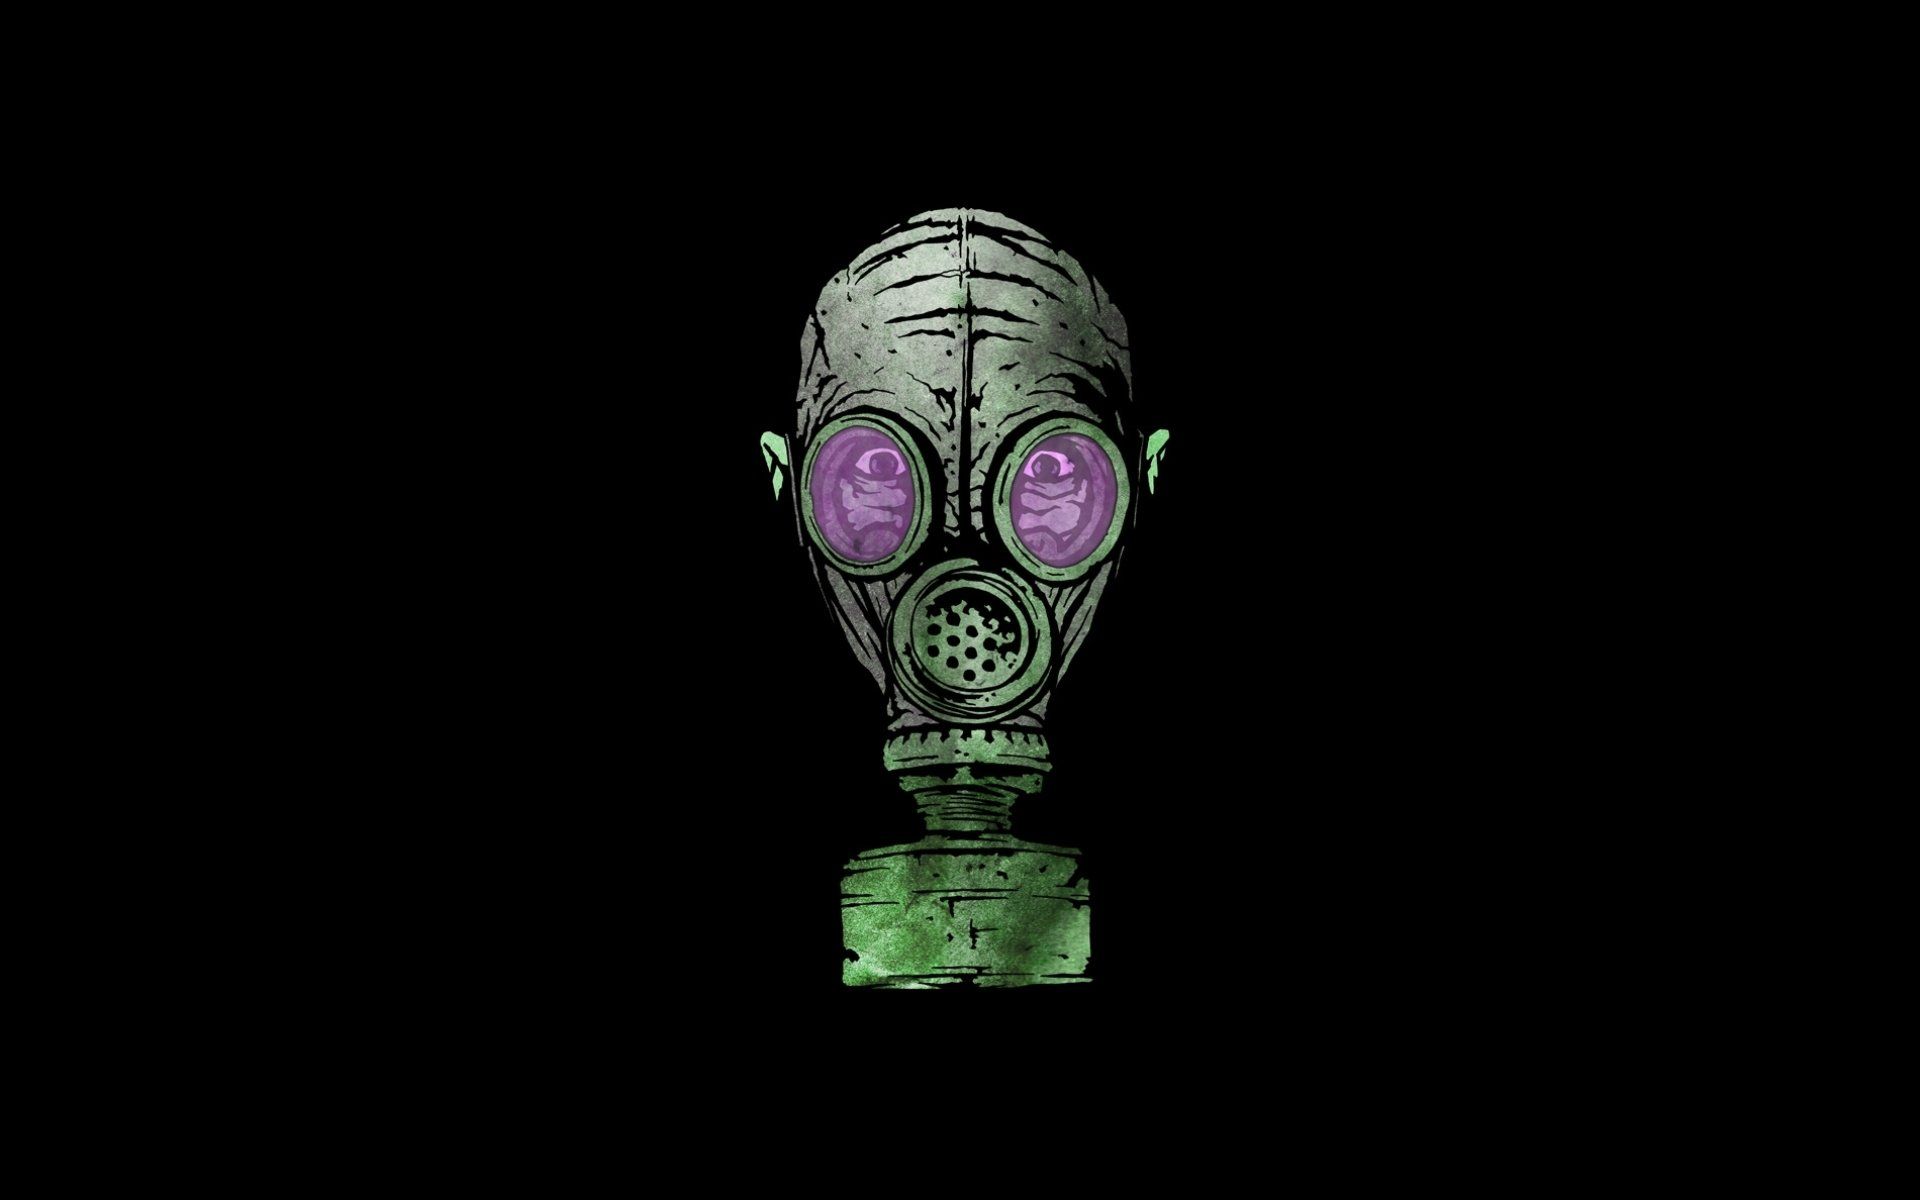 A gas mask with purple lenses on it - Horror, creepy